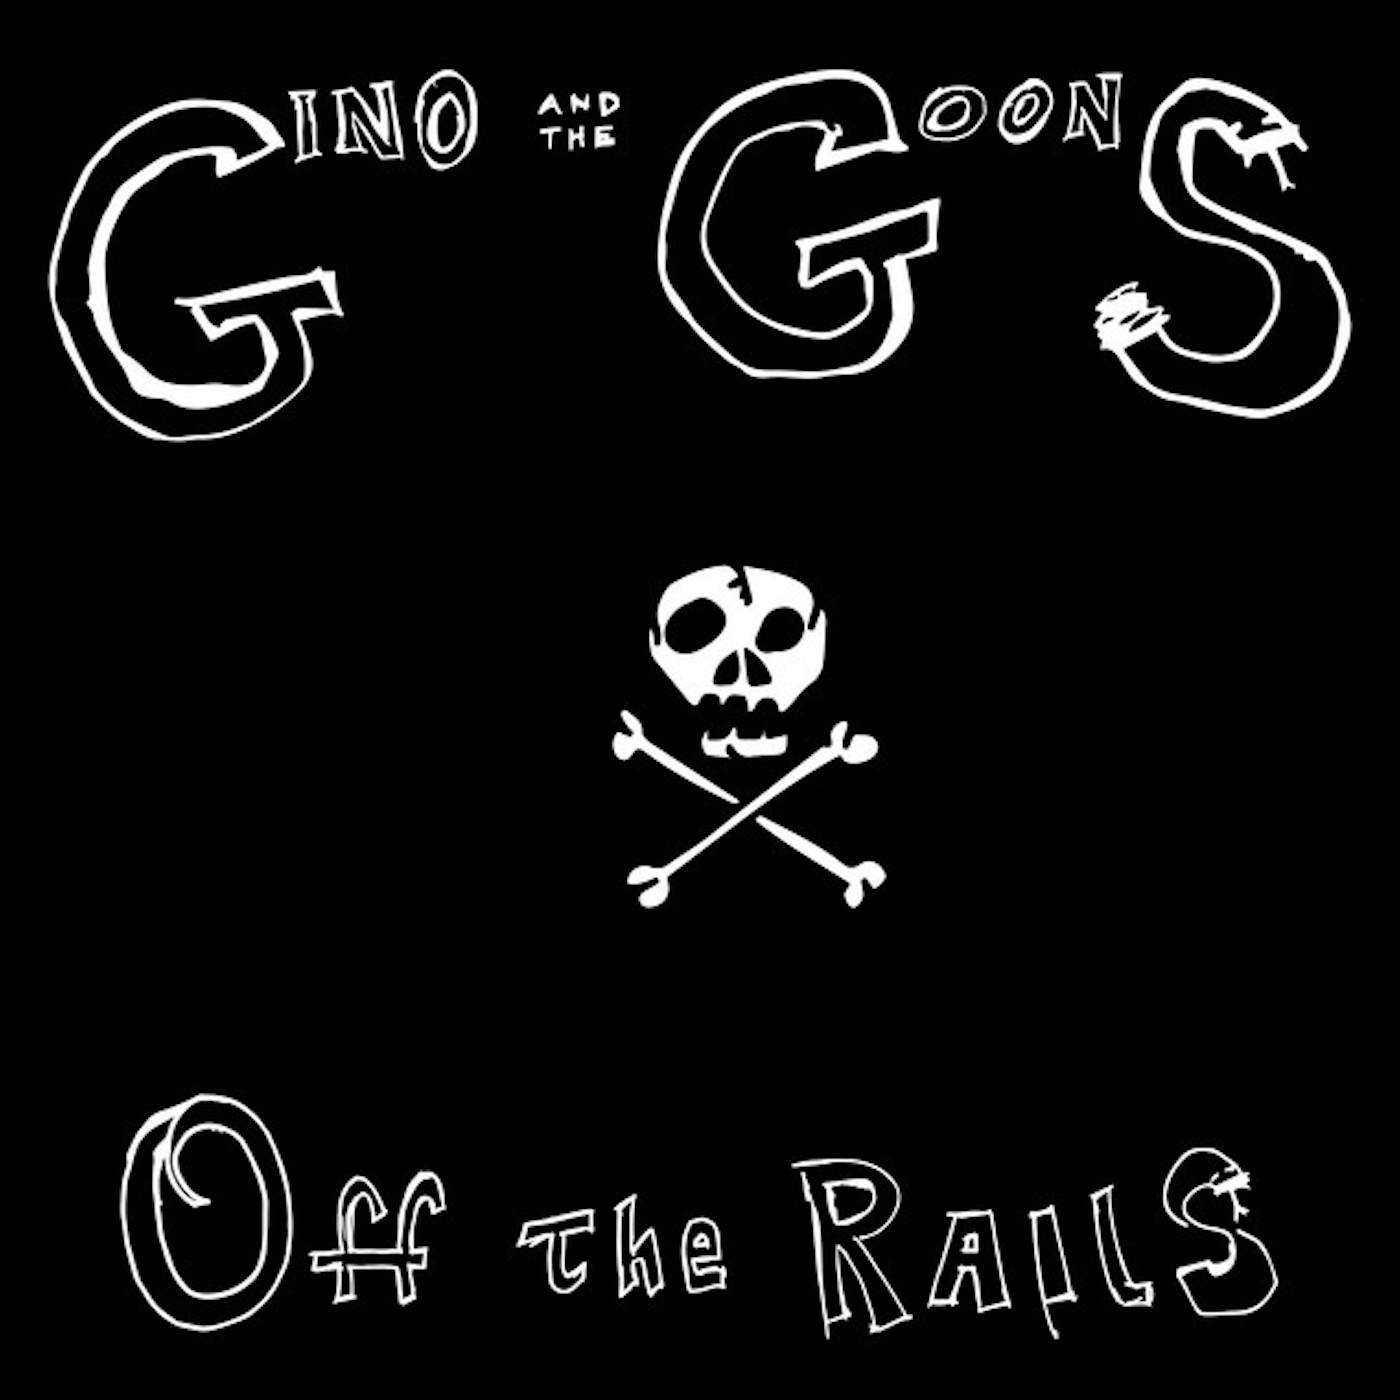 Gino and the Goons OFF THE RAILS CD